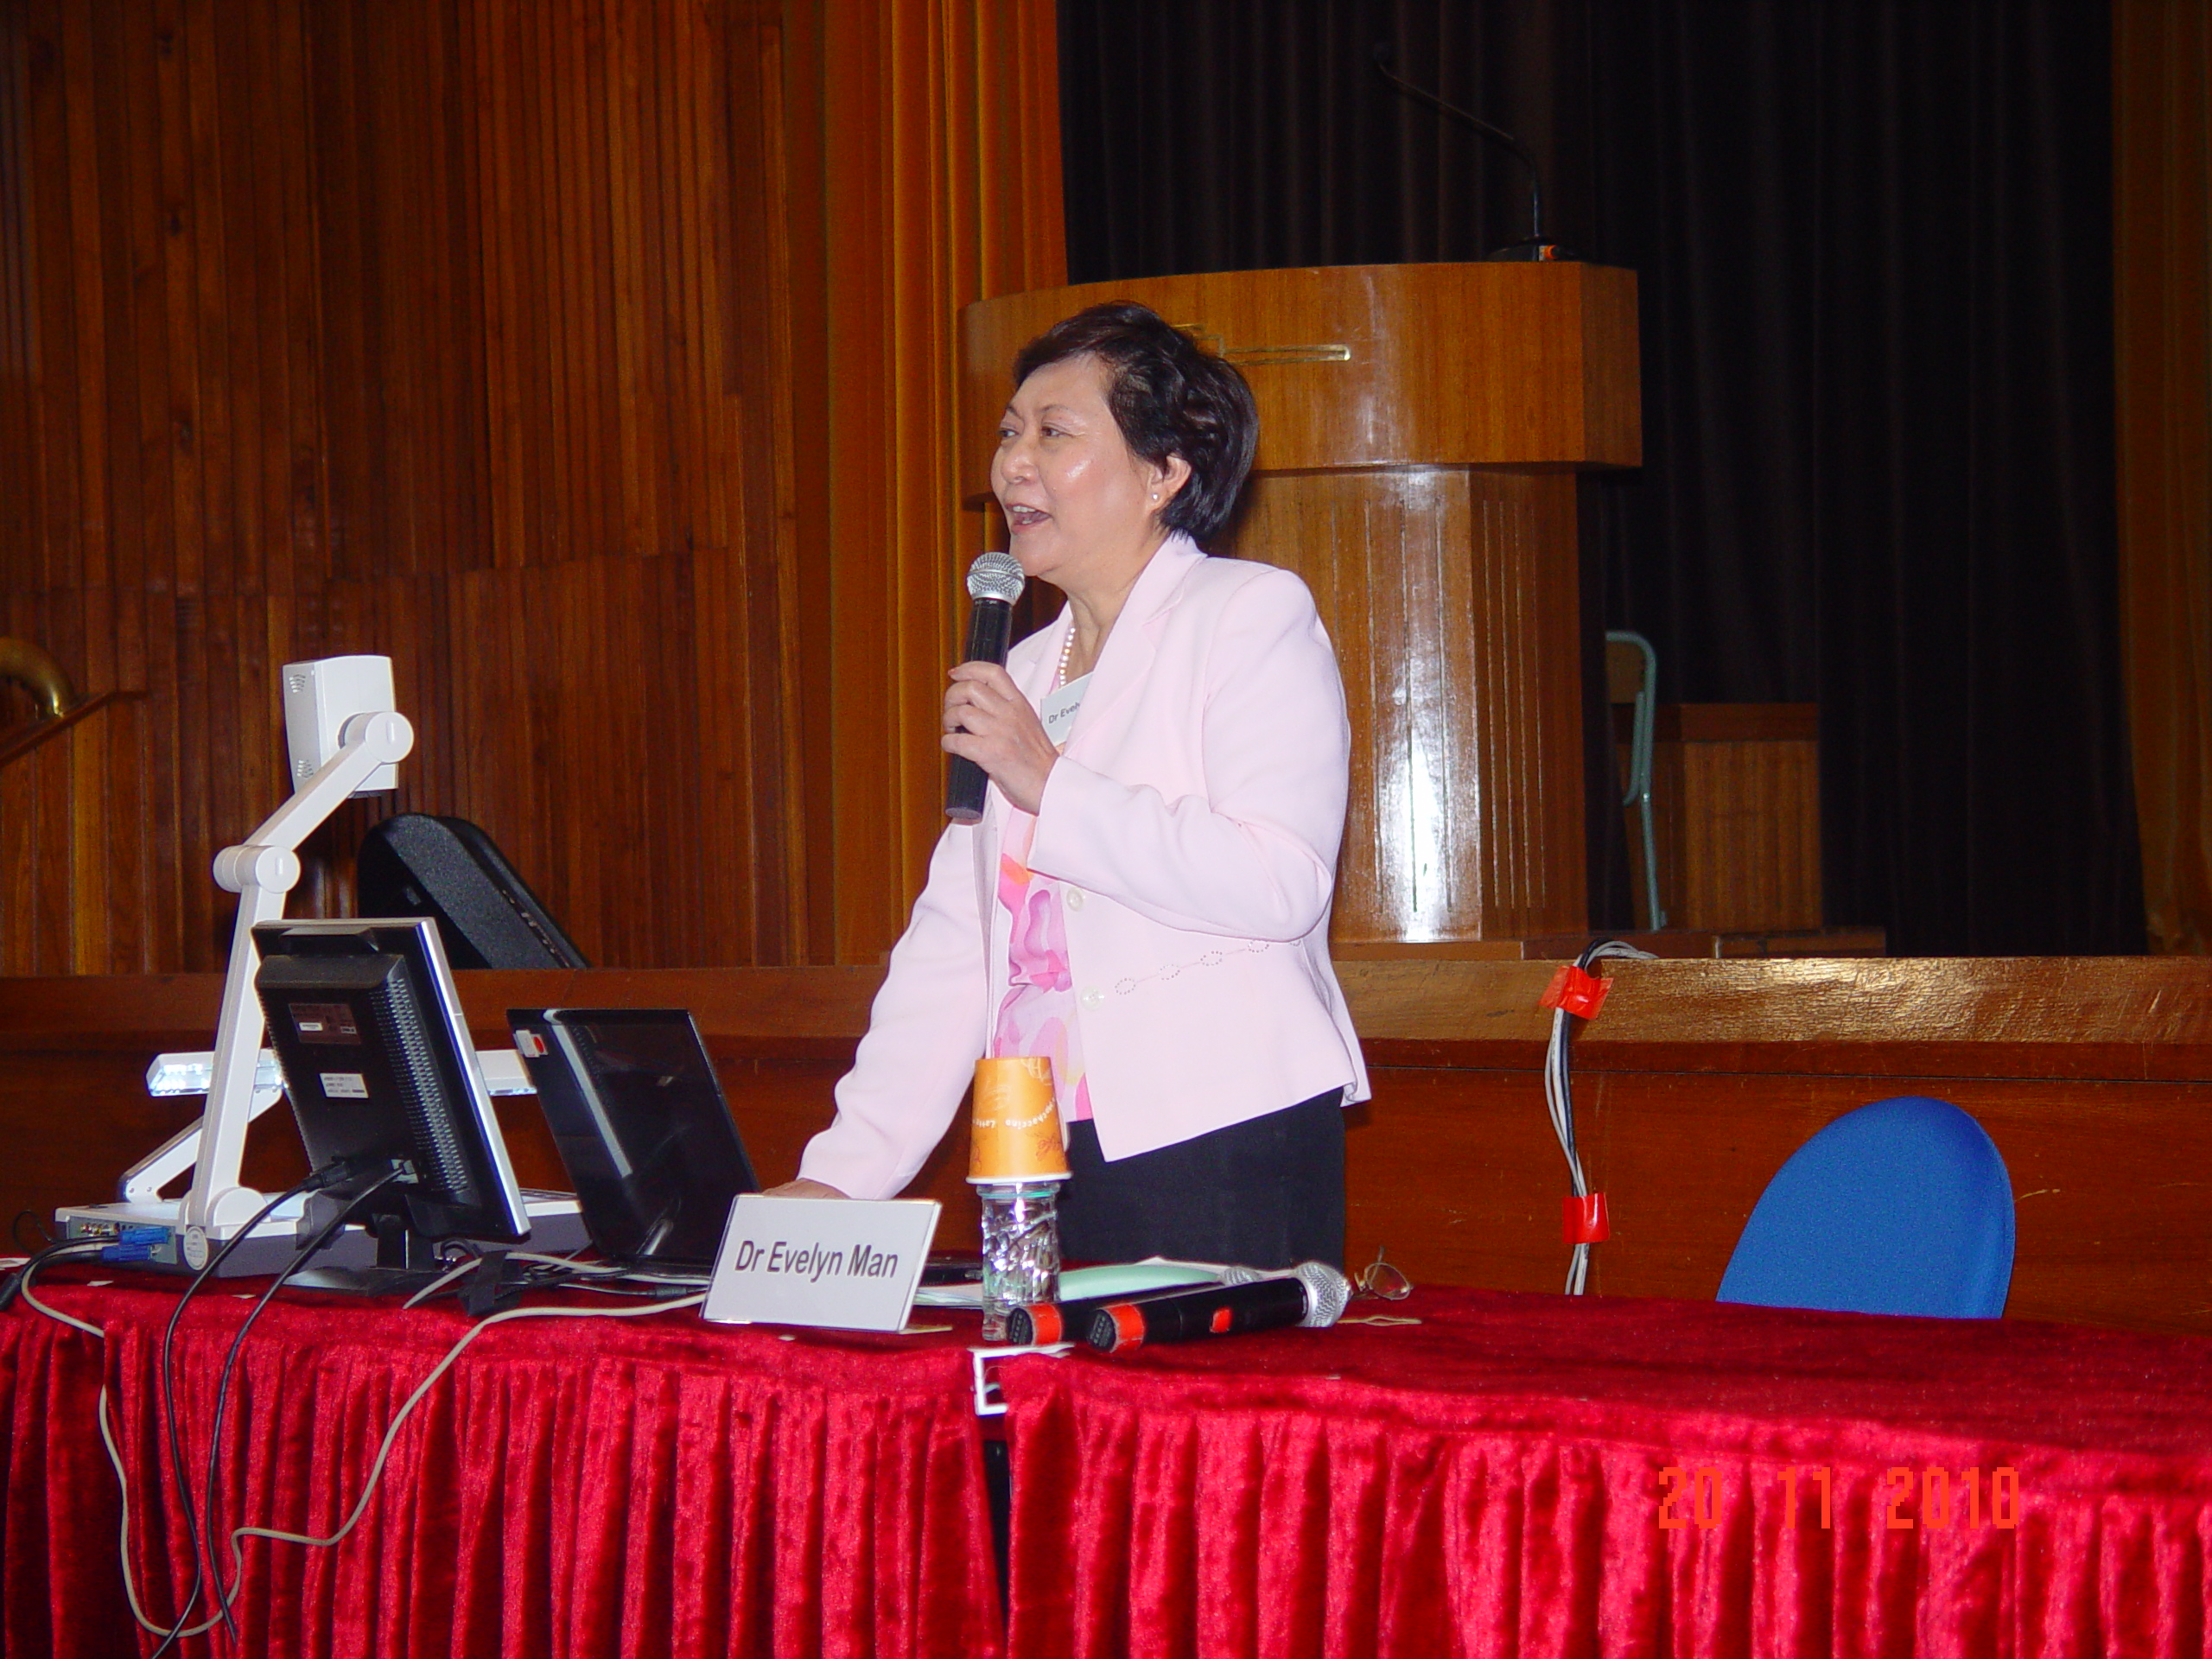 Dr Evelyn Man, Adjunct Associate Professor, Department of Curriculum and Instruction, Faculty of Education, The Chinese University of Hong Kong 